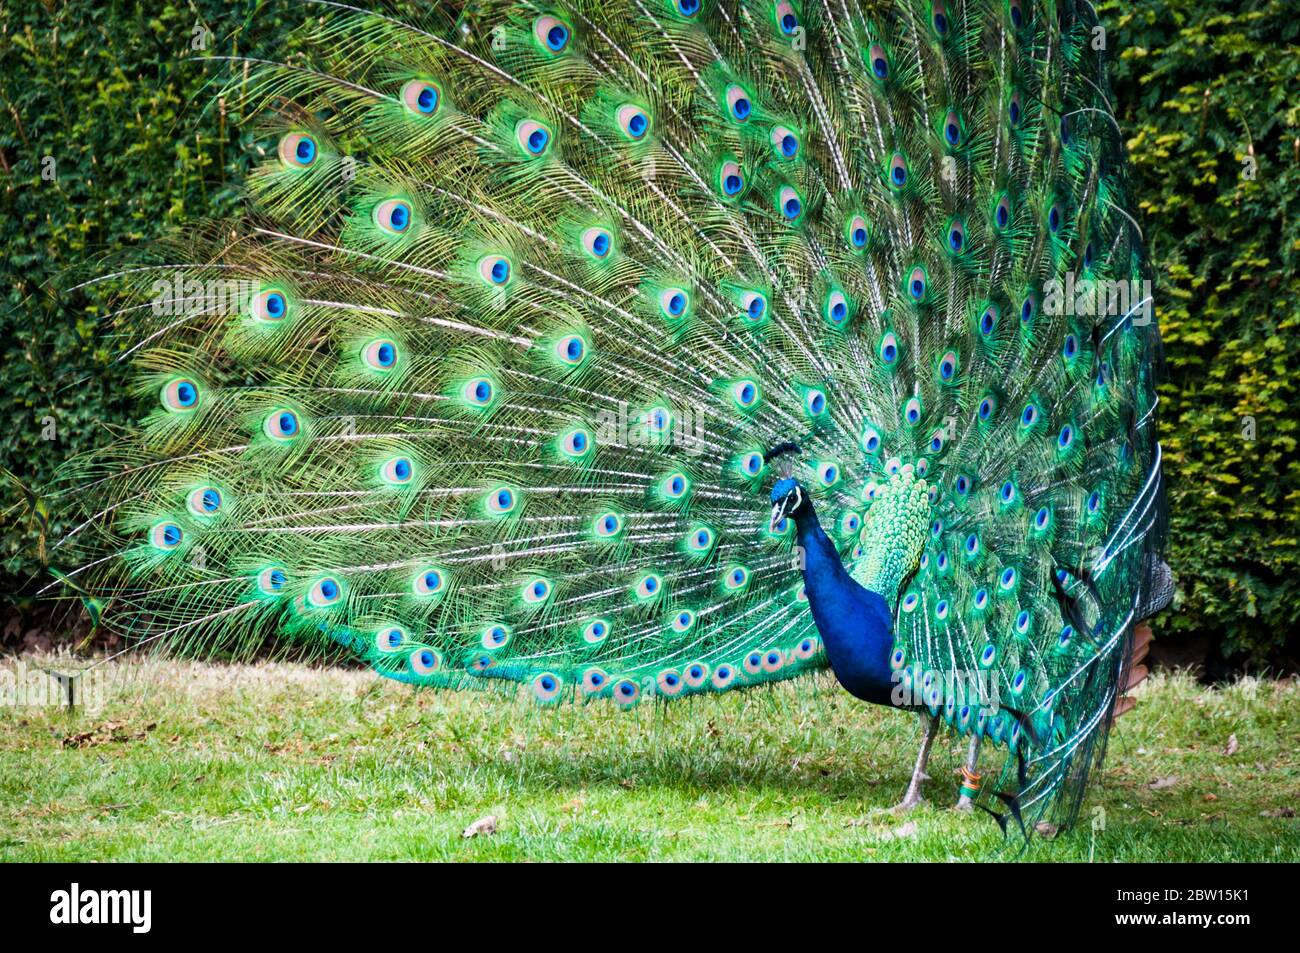 A male peafowl (peacock) with its tail feathers in full fan display.  Picture taken in the gardens of Warwick Castle Stock Photo - Alamy